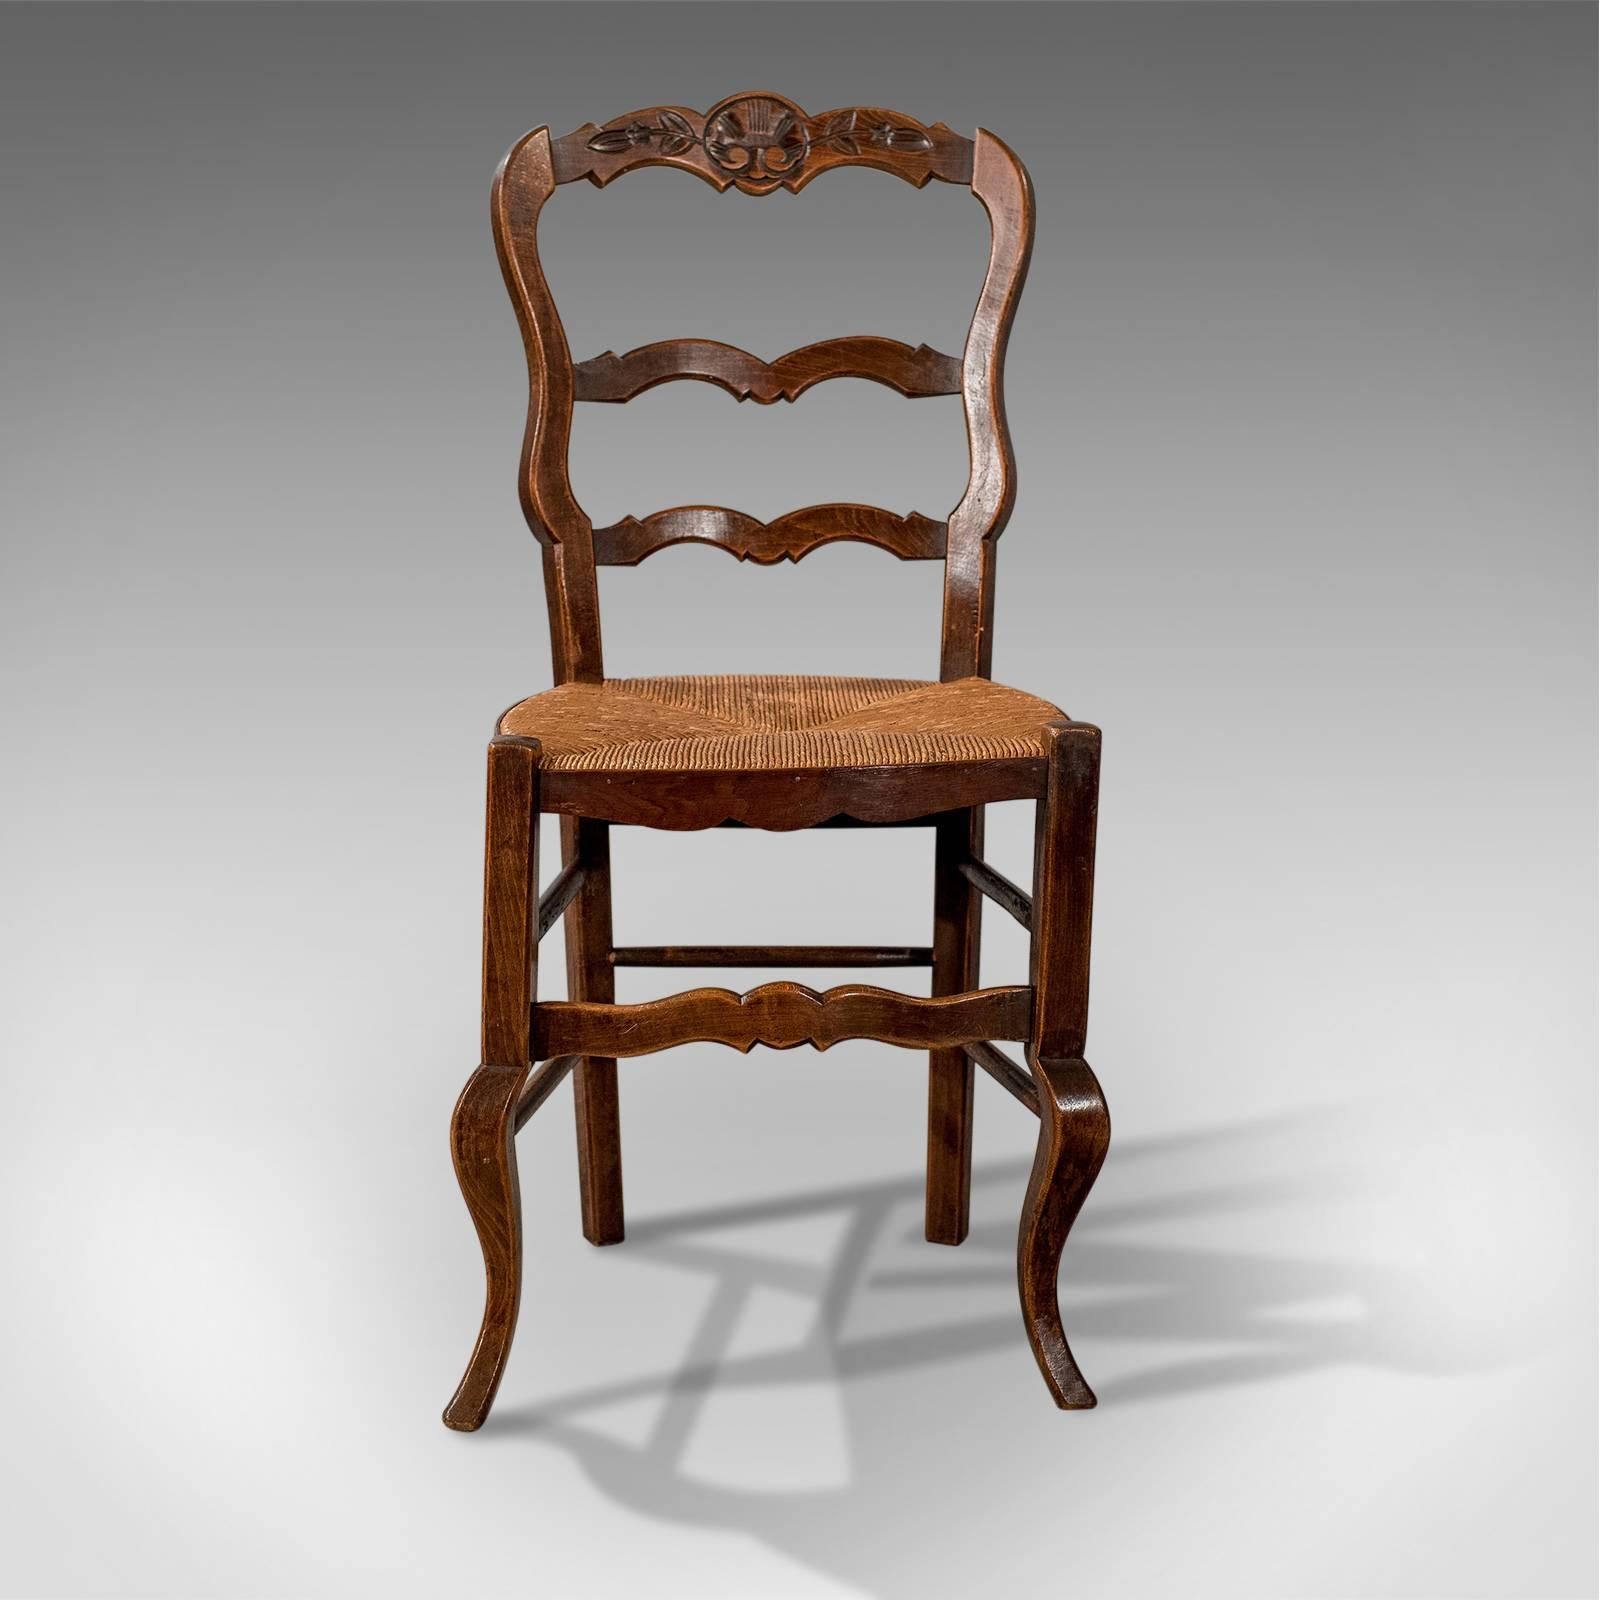 This is a set of four antique dining chairs in dark beech. French country kitchen chairs dating to the late 19th century, circa 1900.

Well crafted country chairs with charm and character
Attractive tones to the dark beech which display good